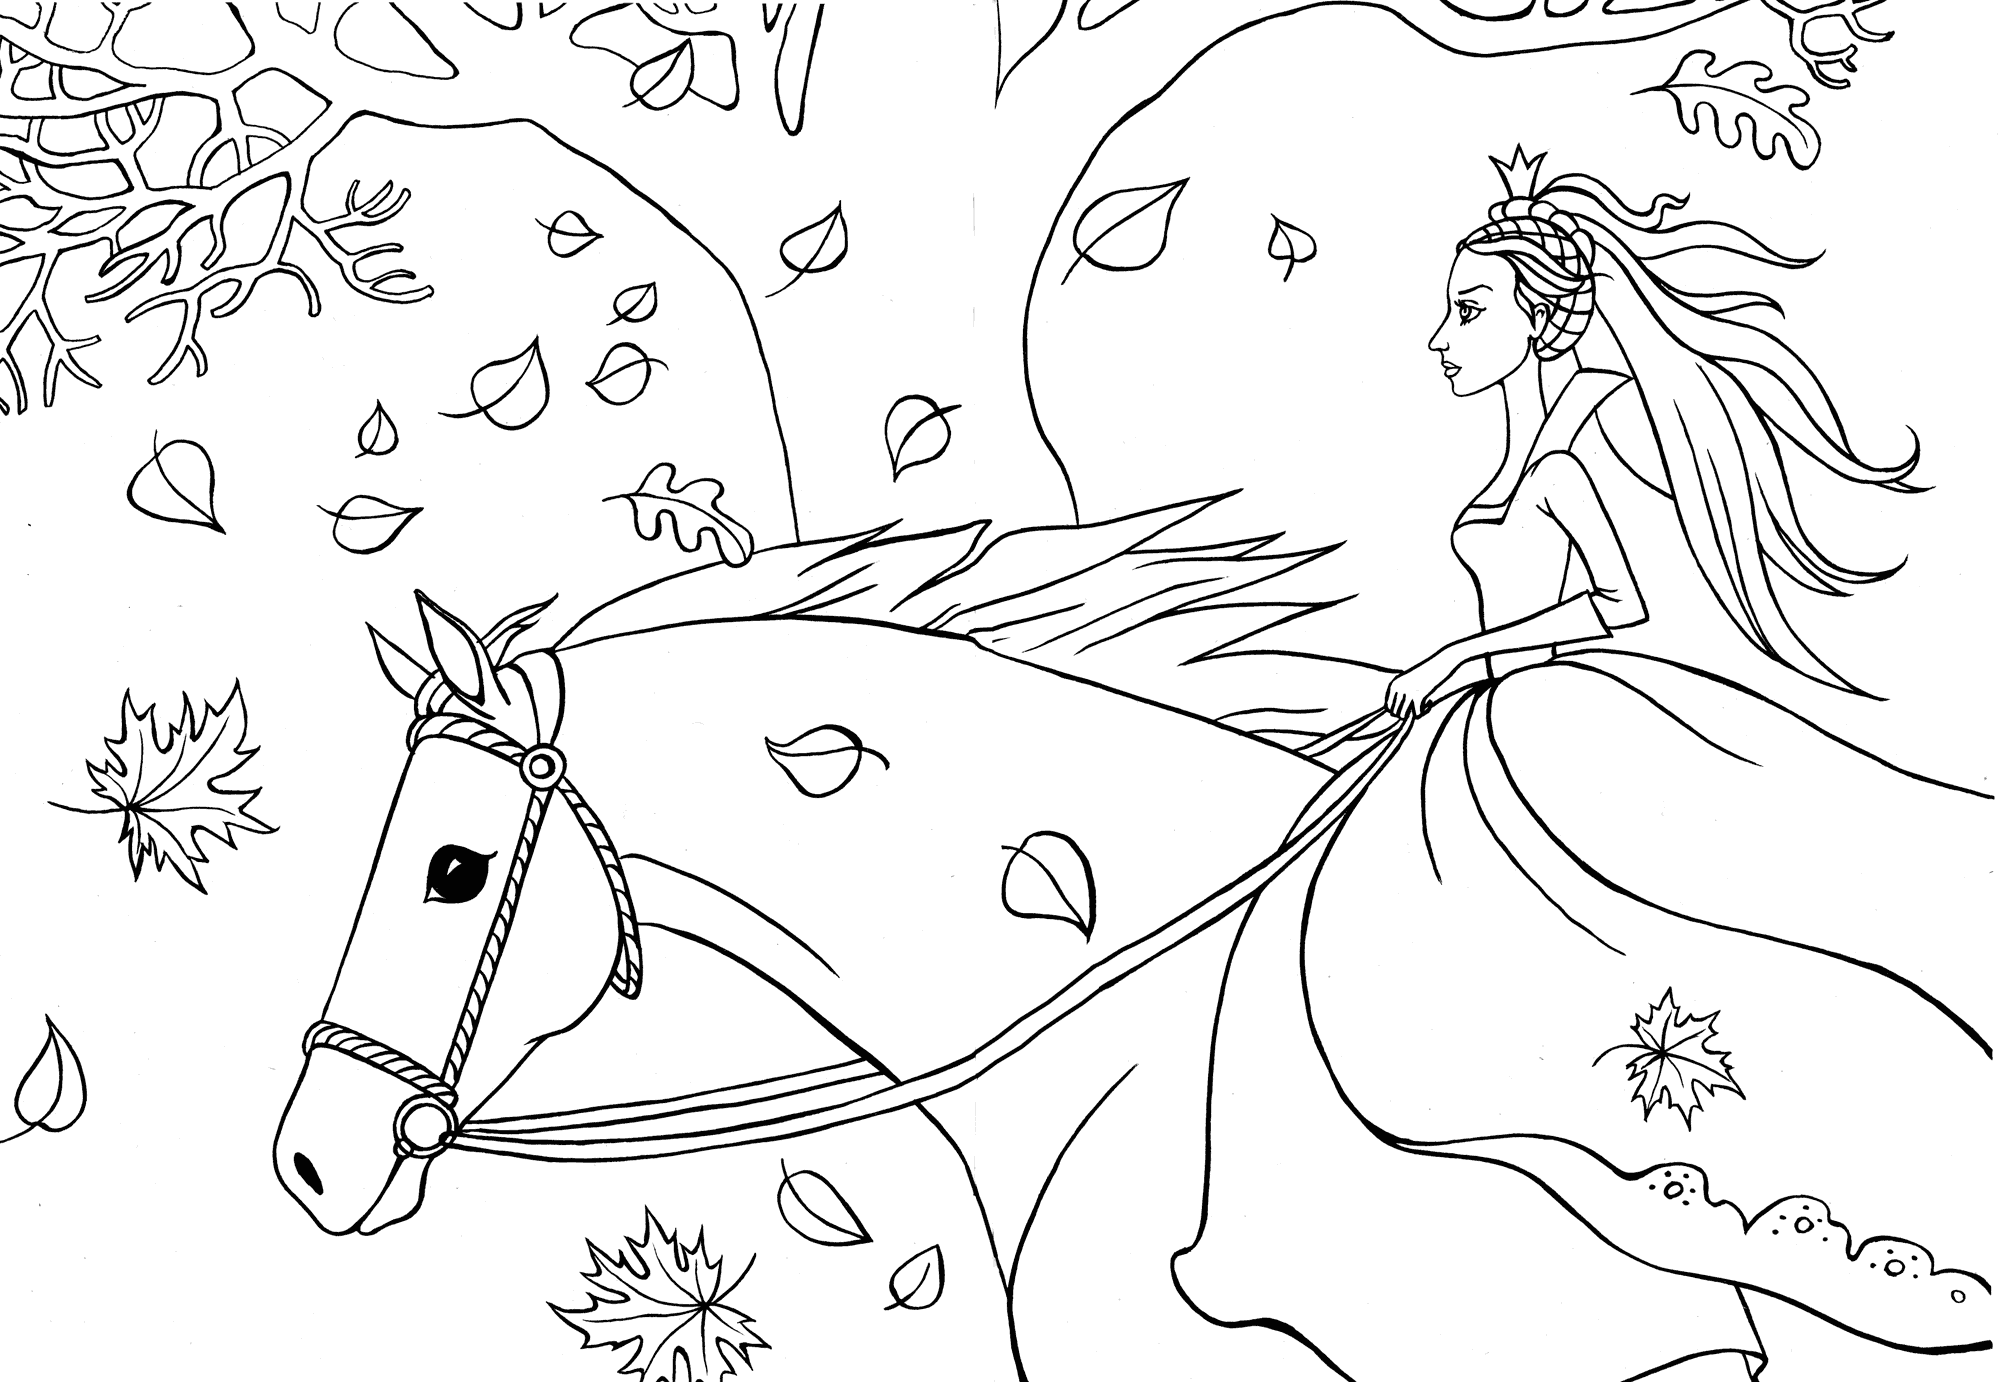 Download Coloring page - HORSE RIDING